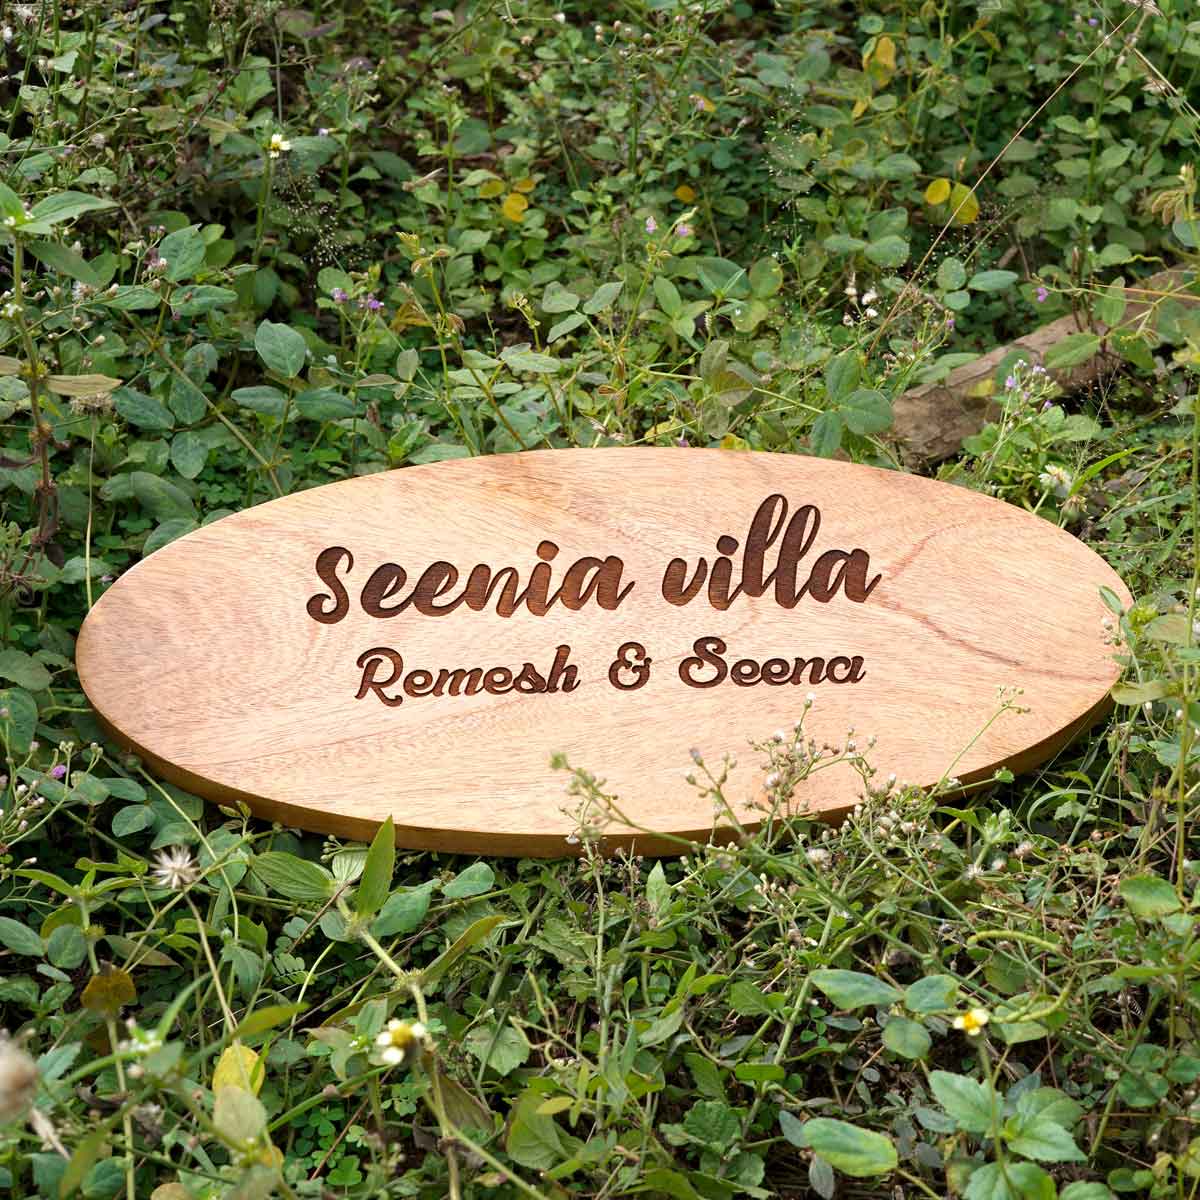 Wooden House Name Board Oval shape